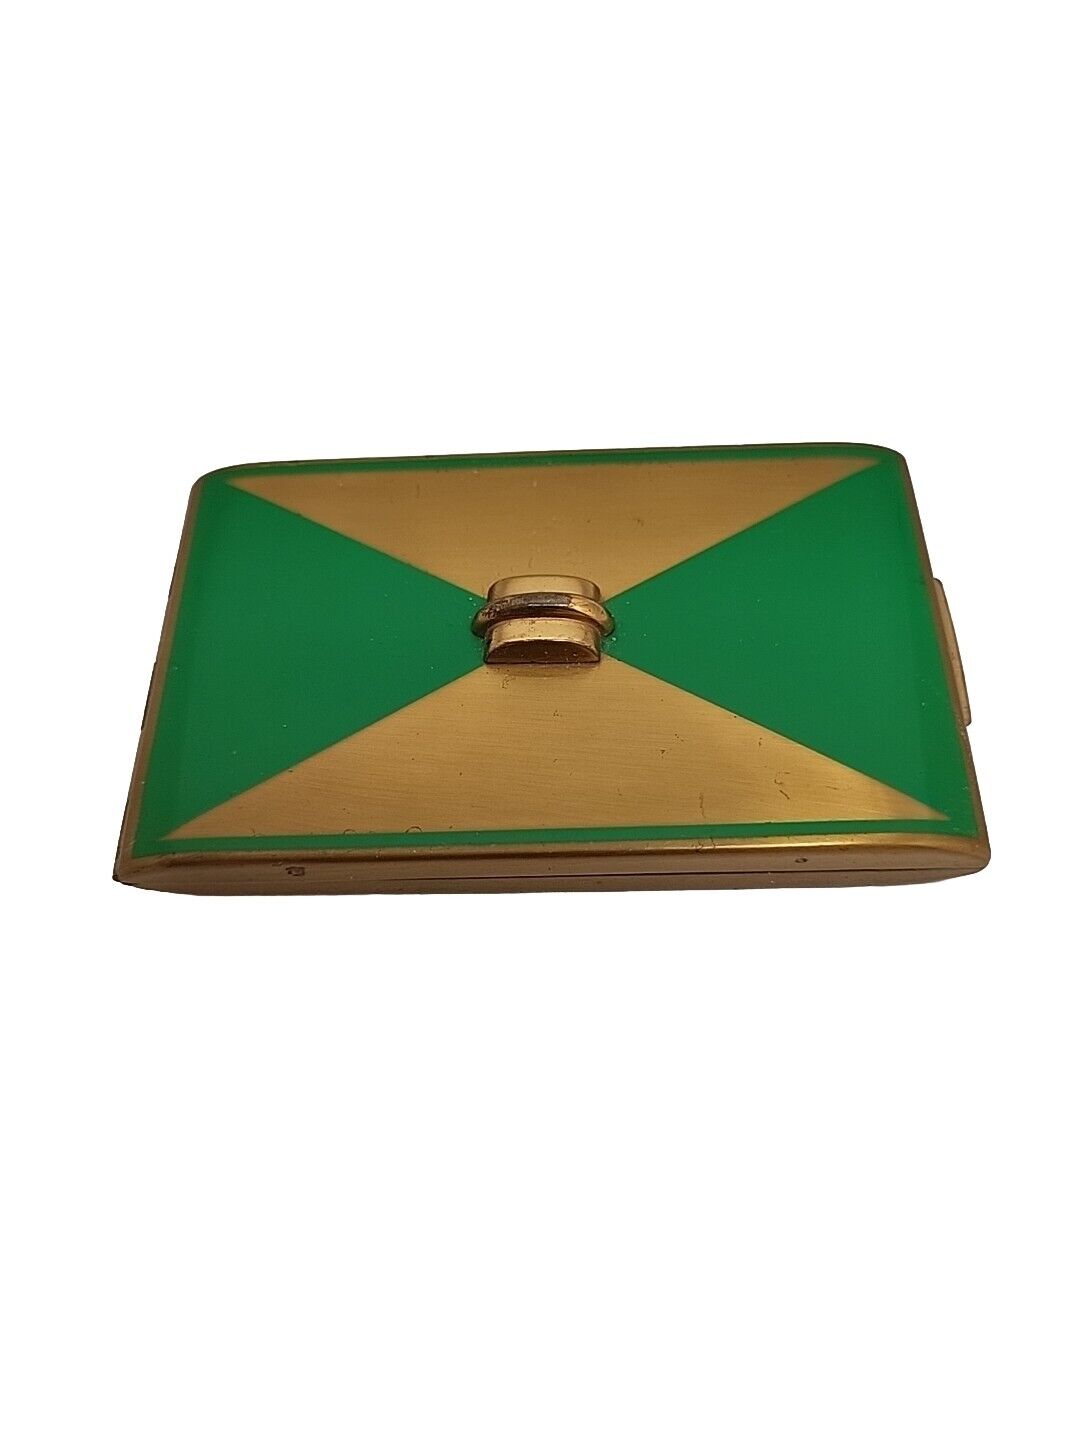 Vintage Mid Century Modern Gold & Green Folding  Compact Mirror Made In England